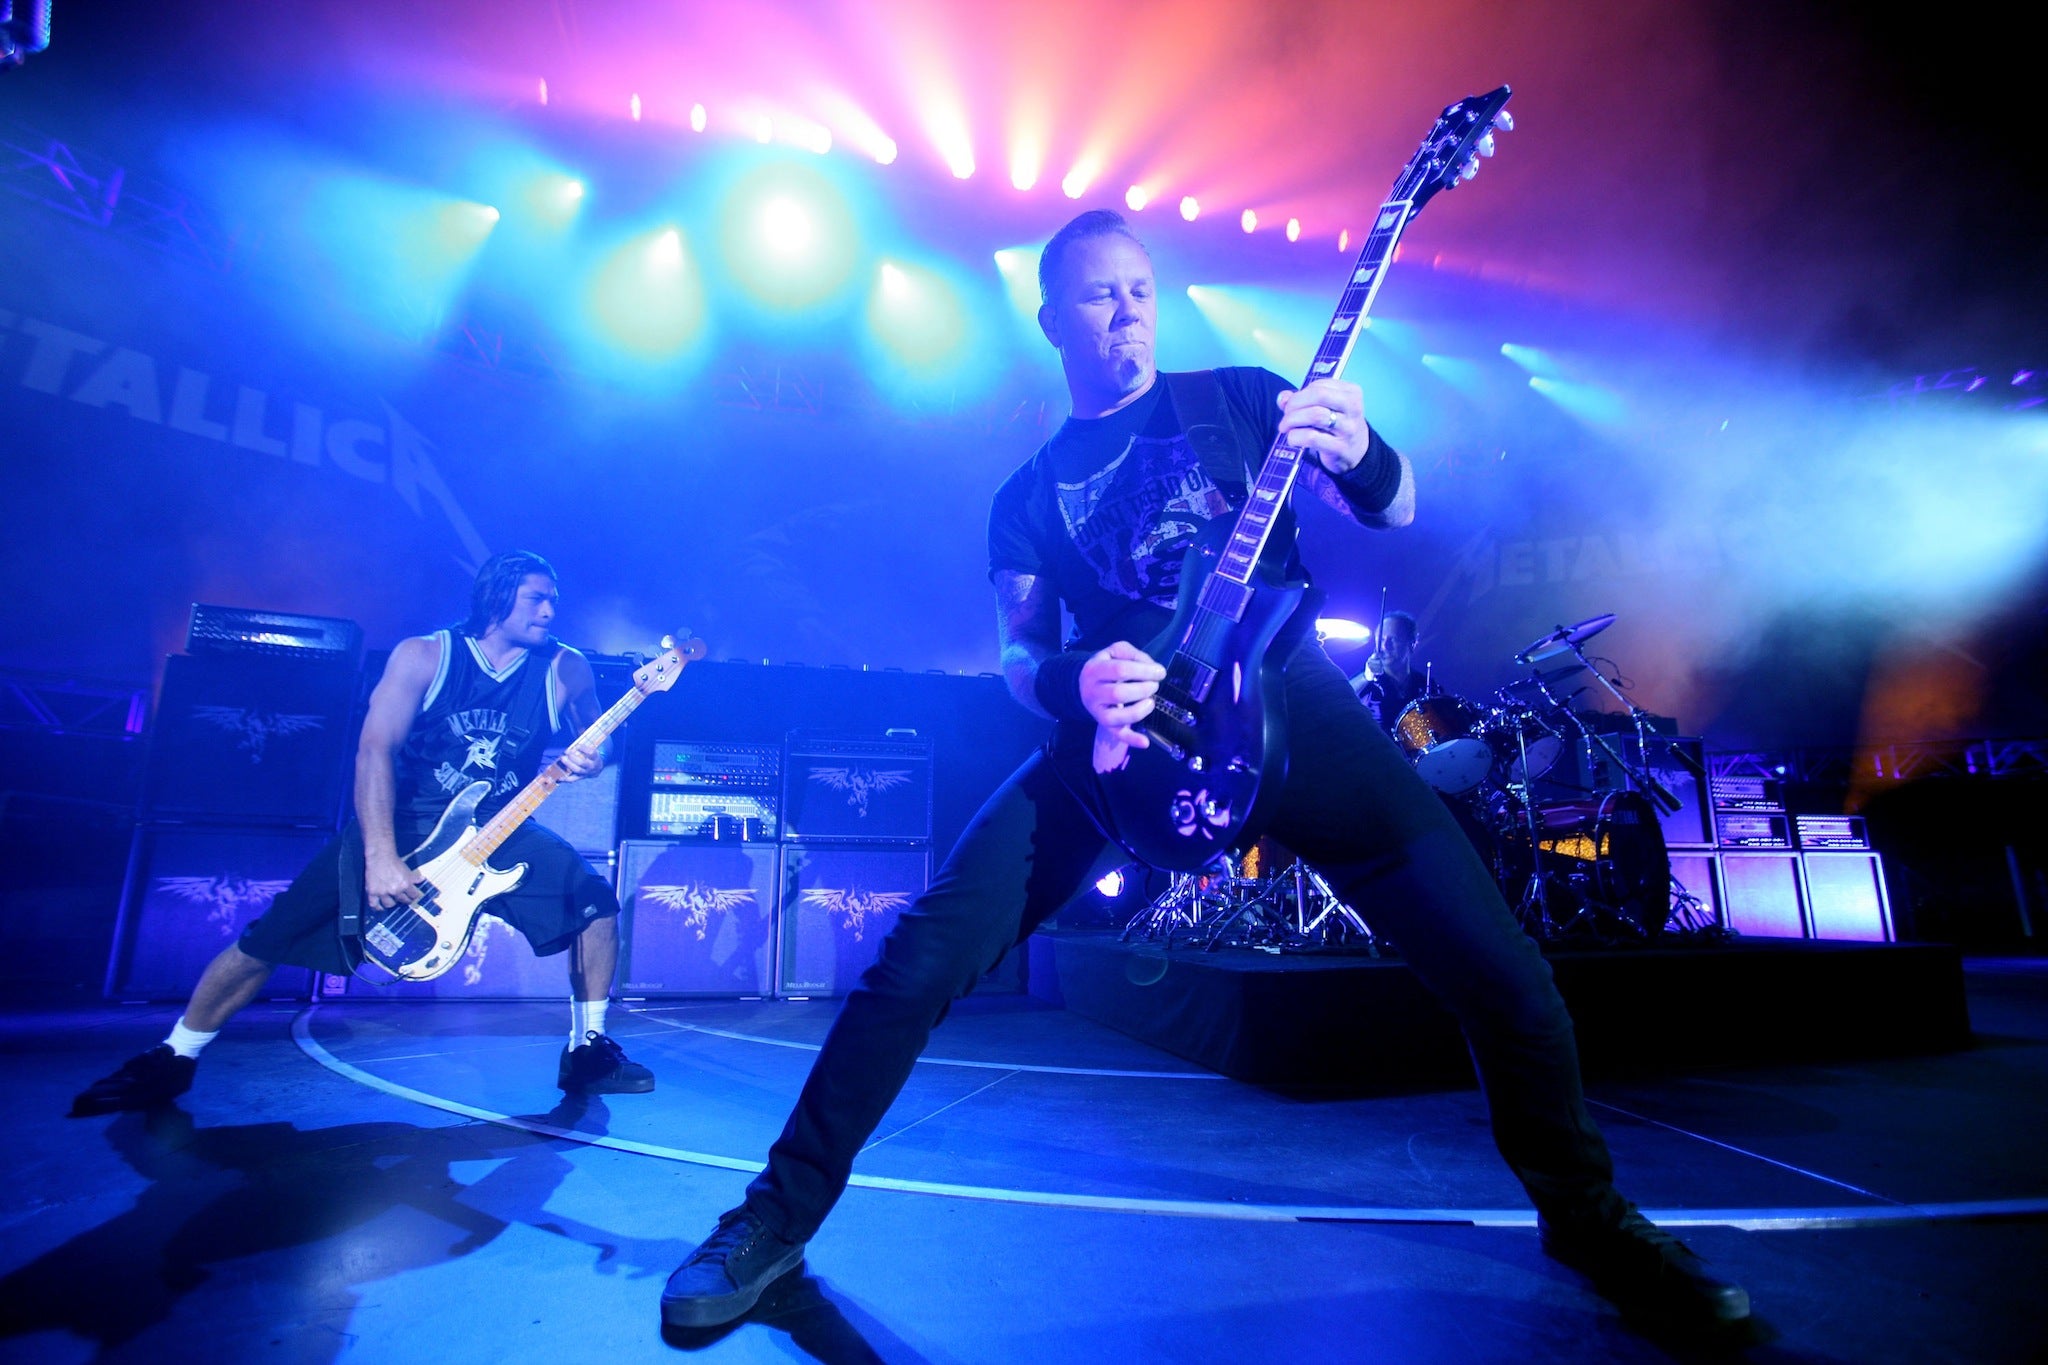 Metallica are Paddy Power's joint 5/4 favourites with Prince to headline Glastonbury Festival in June